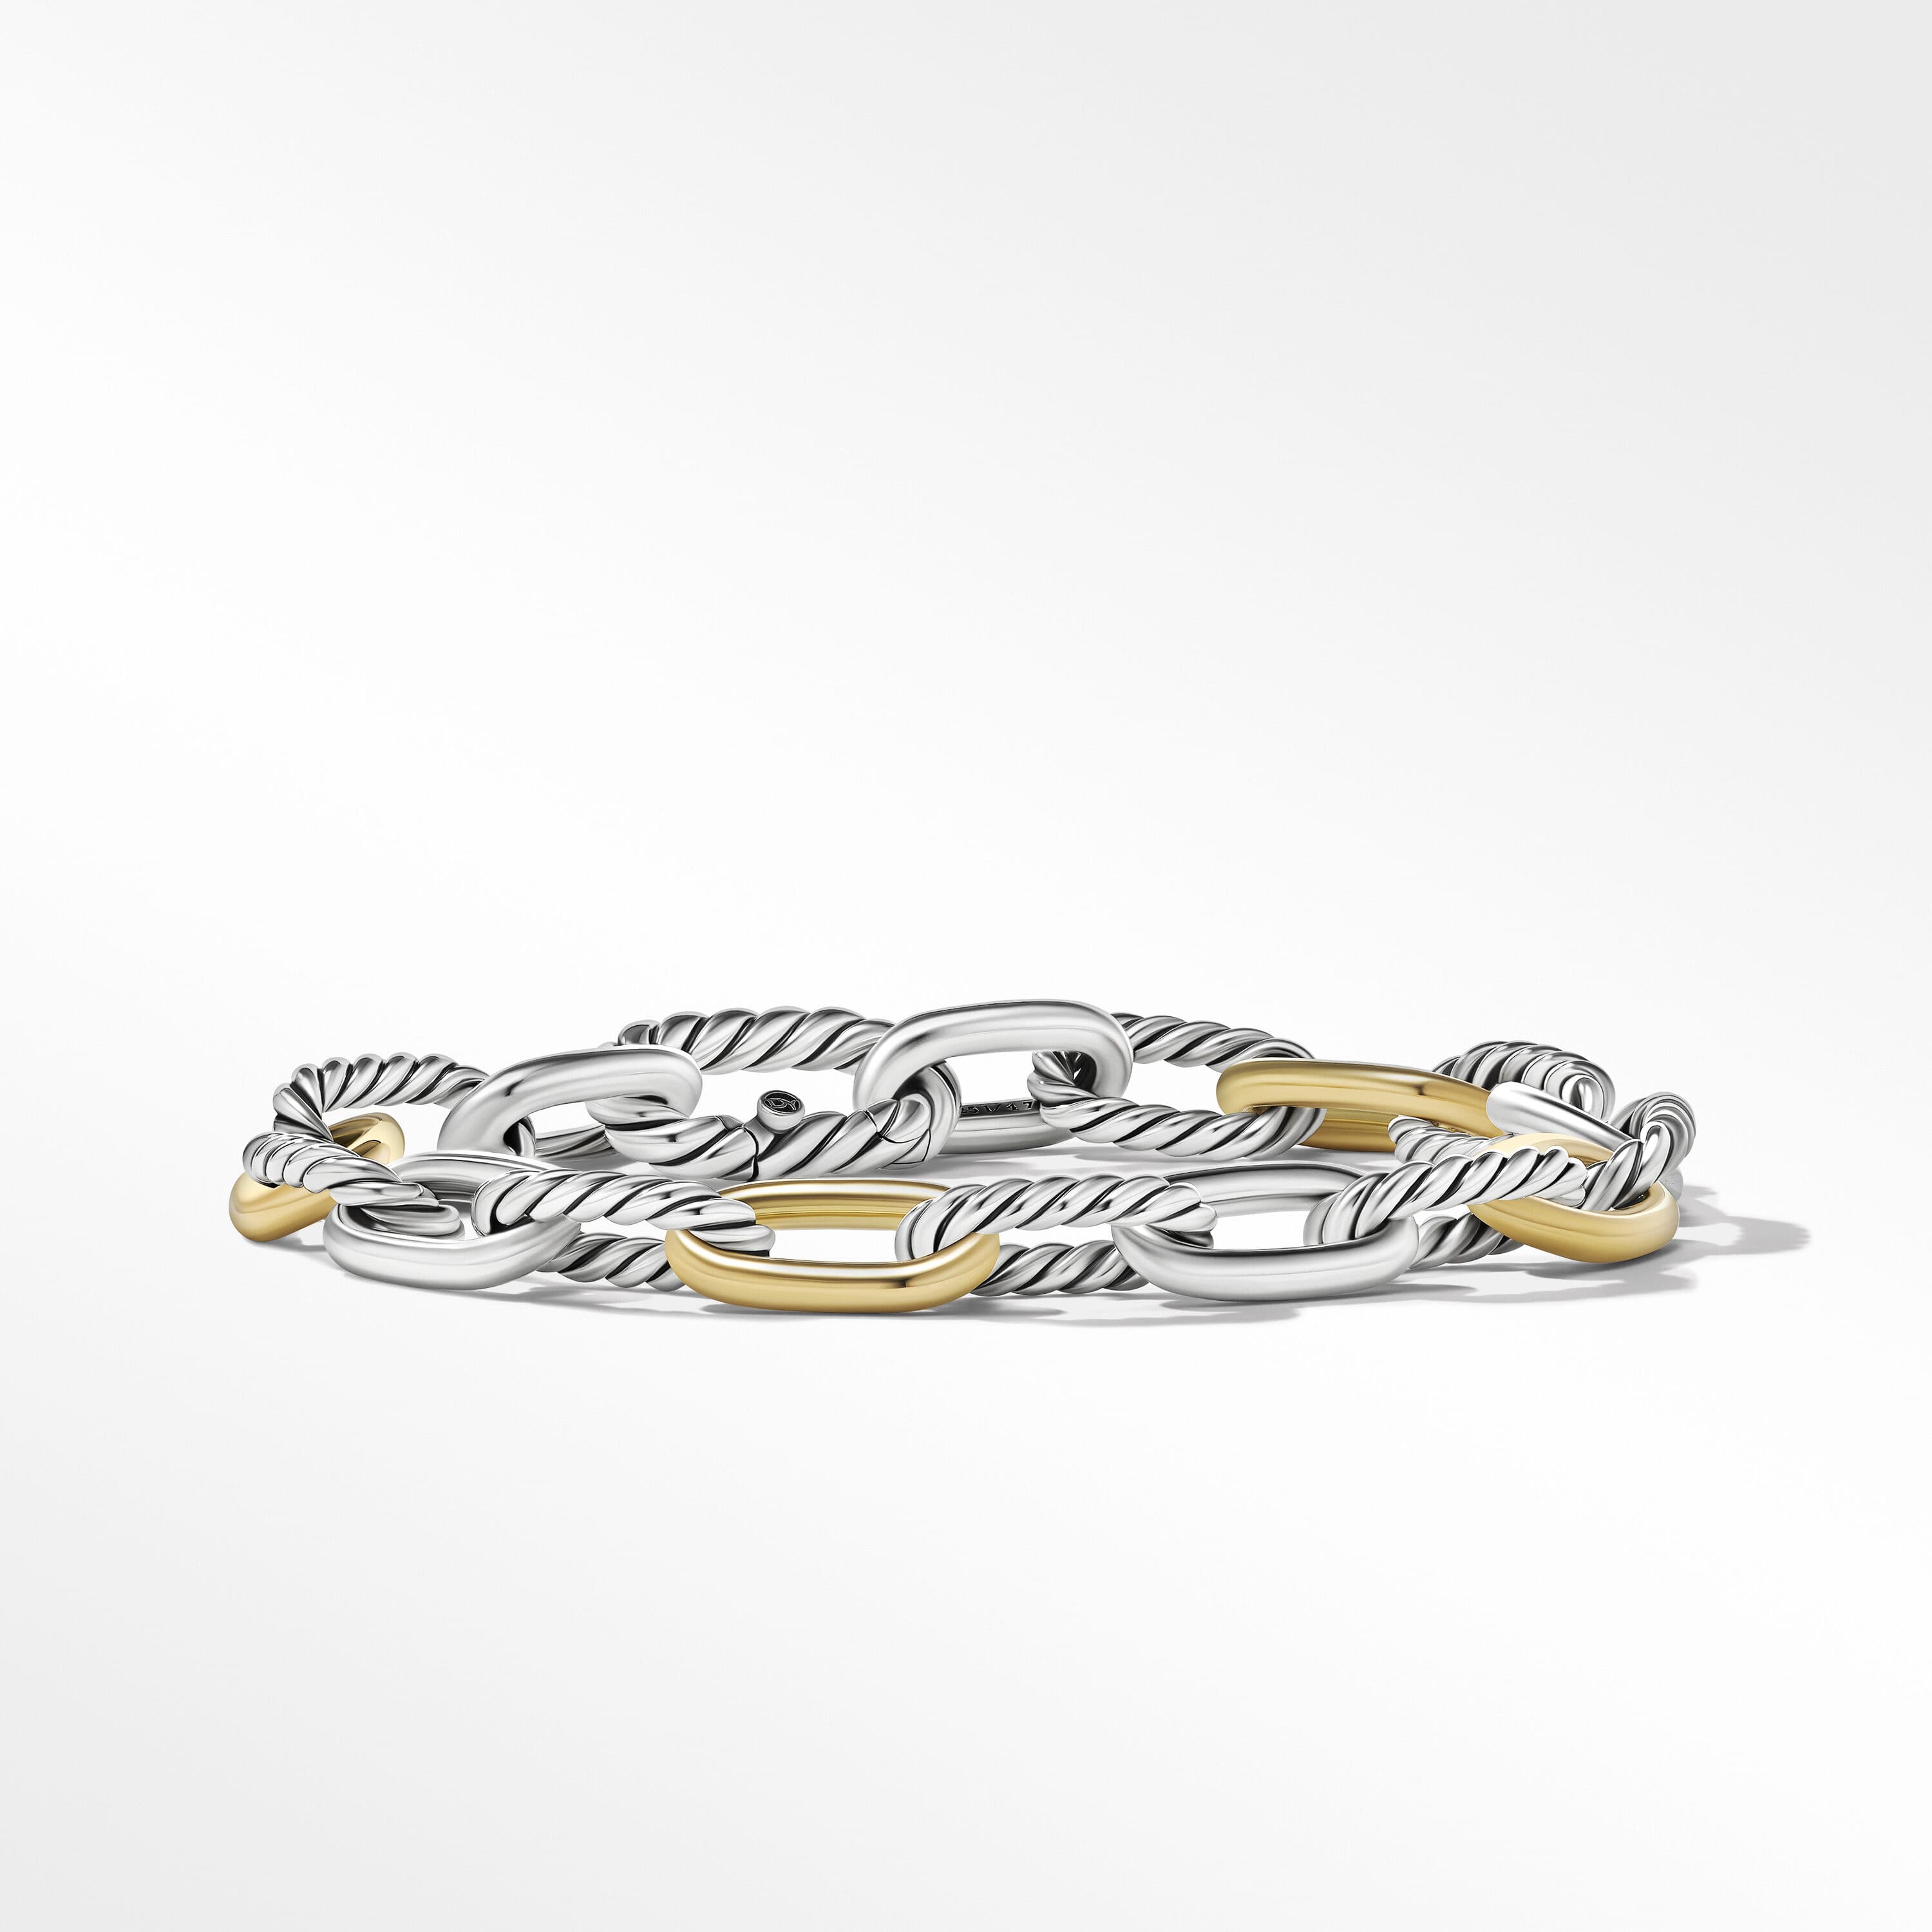 David Yurman DY Madison Chain 8.5mm Bracelet in Sterling Silver with 18k Yellow Gold, size large 0